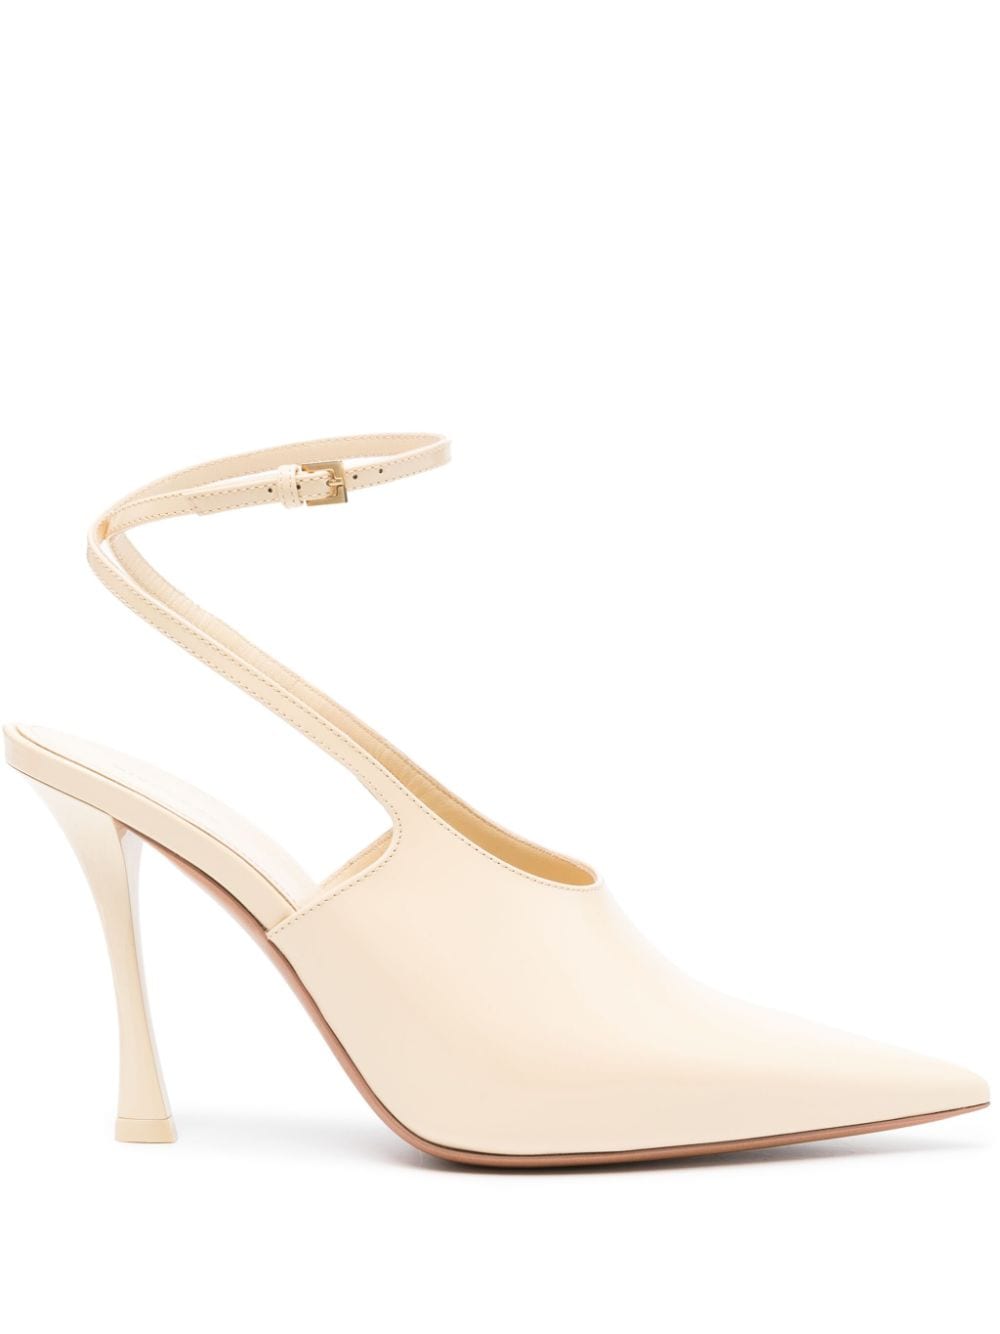 Shop Givenchy Show 105mm Leather Pumps In Neutrals